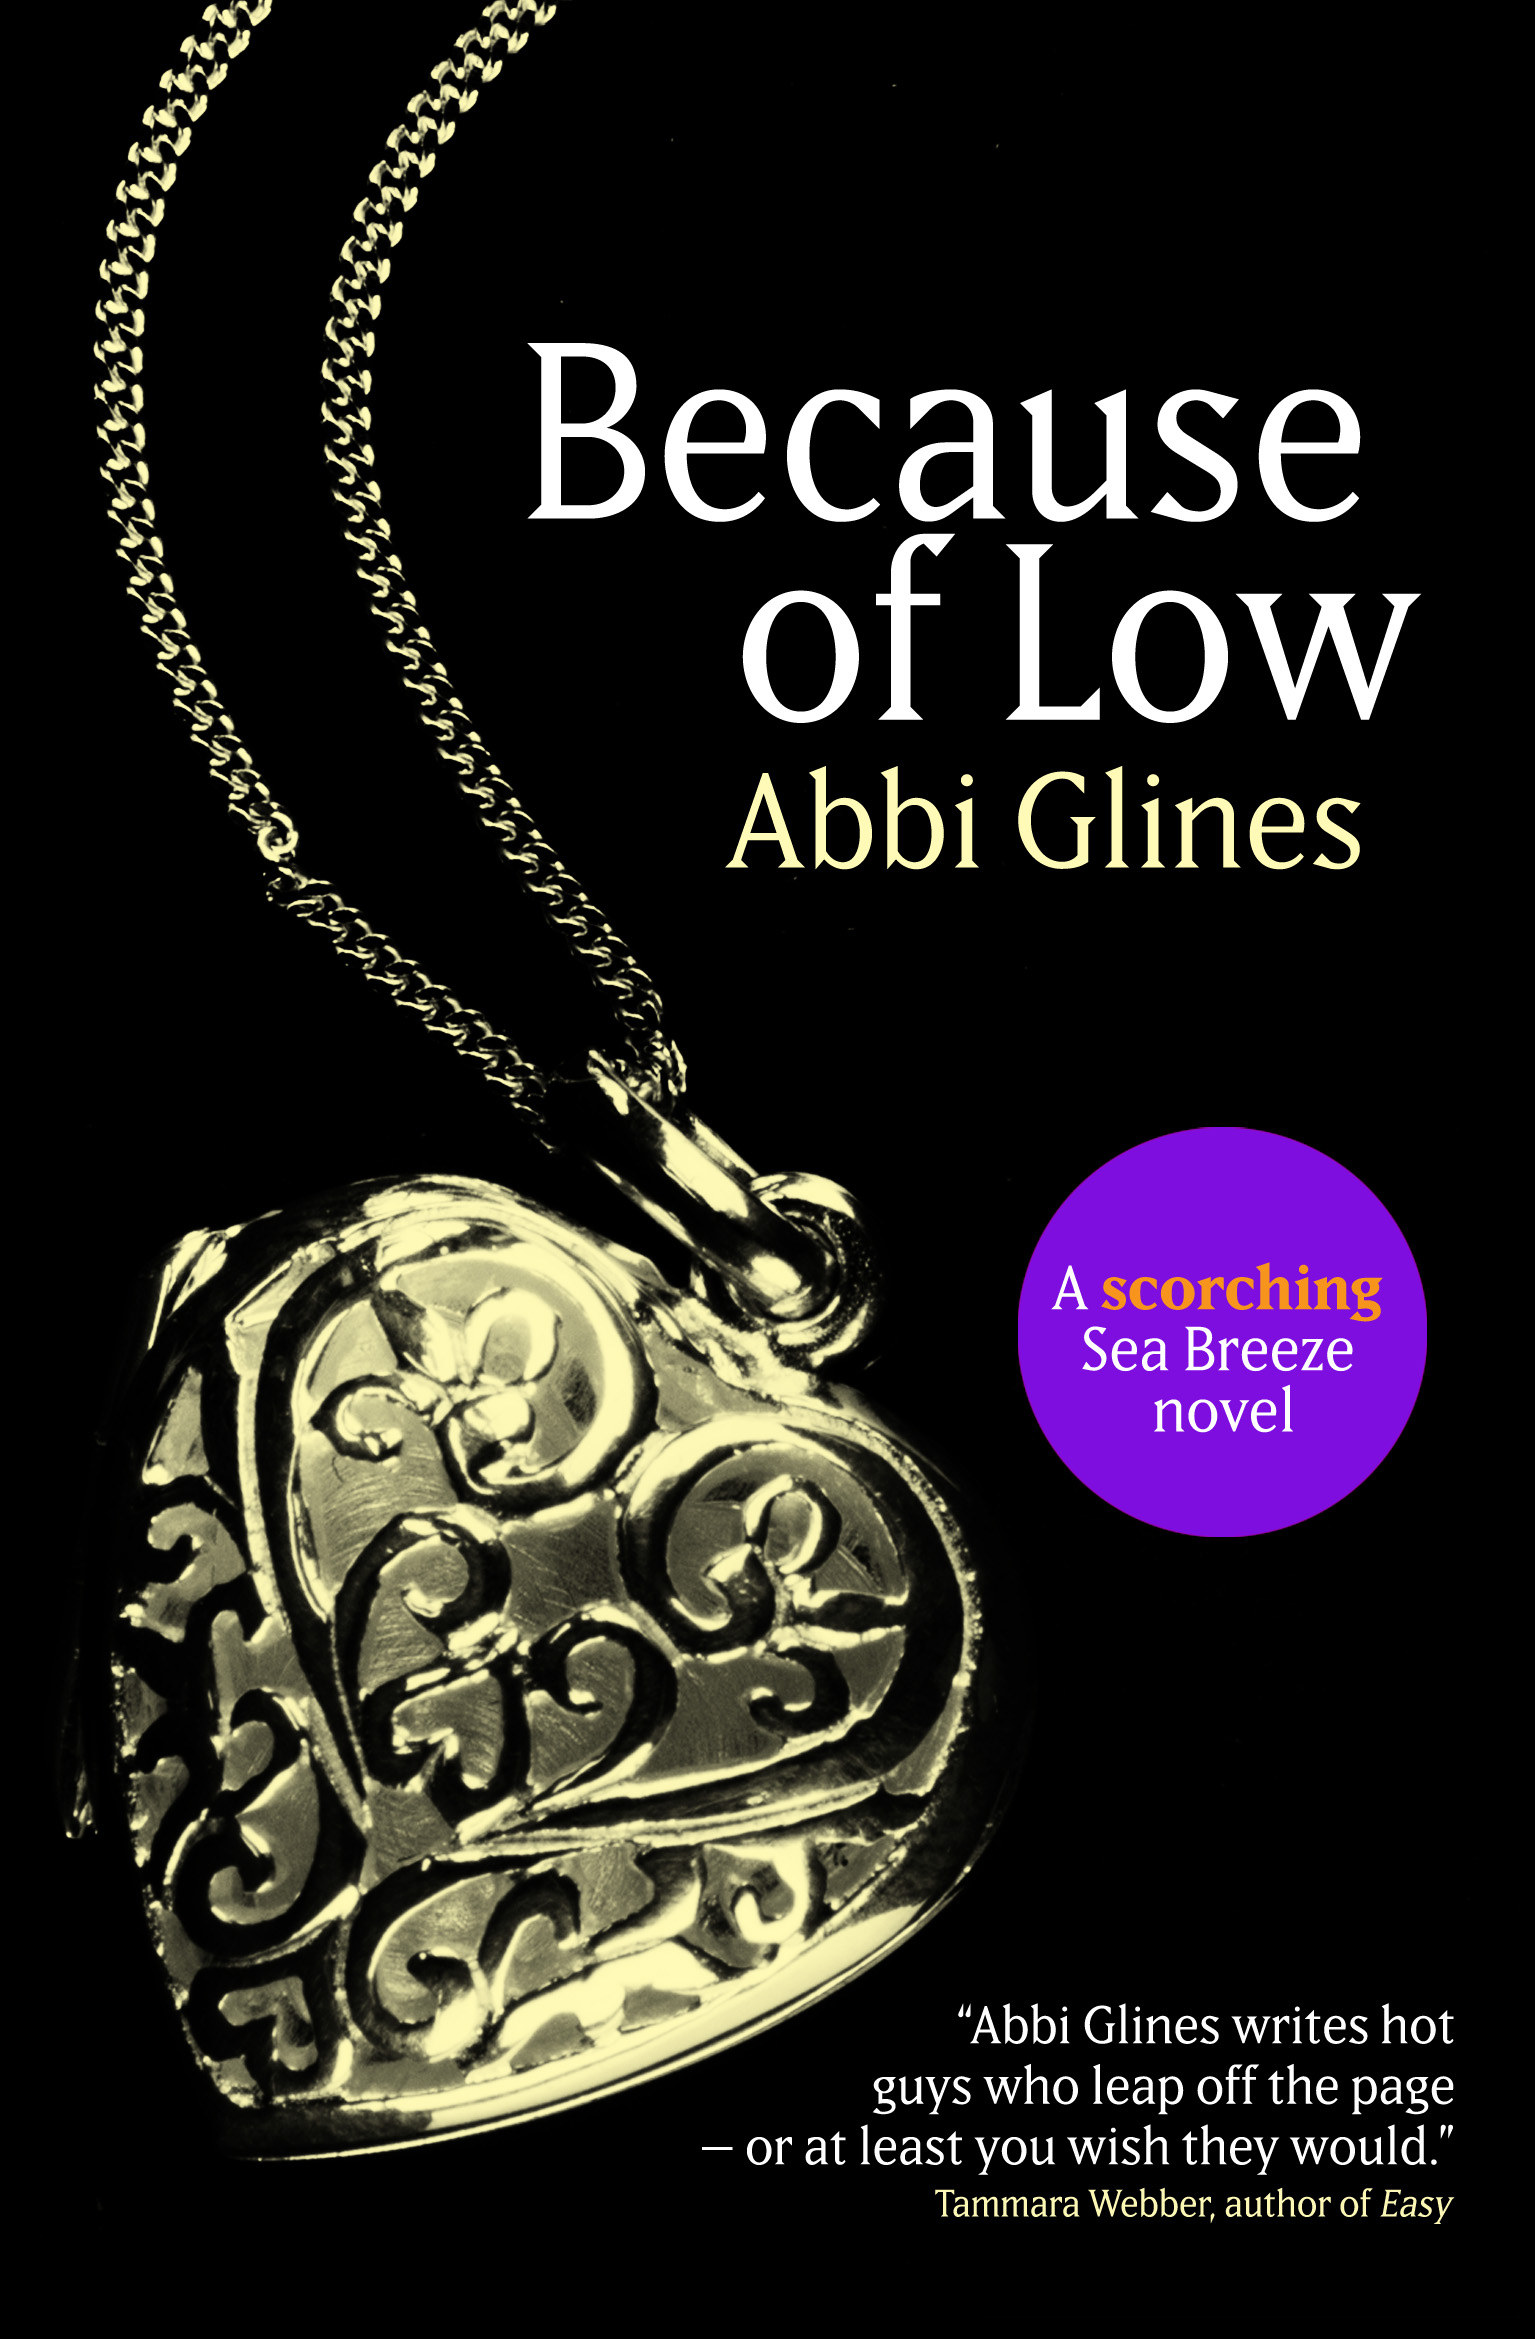 abbi glines because of low